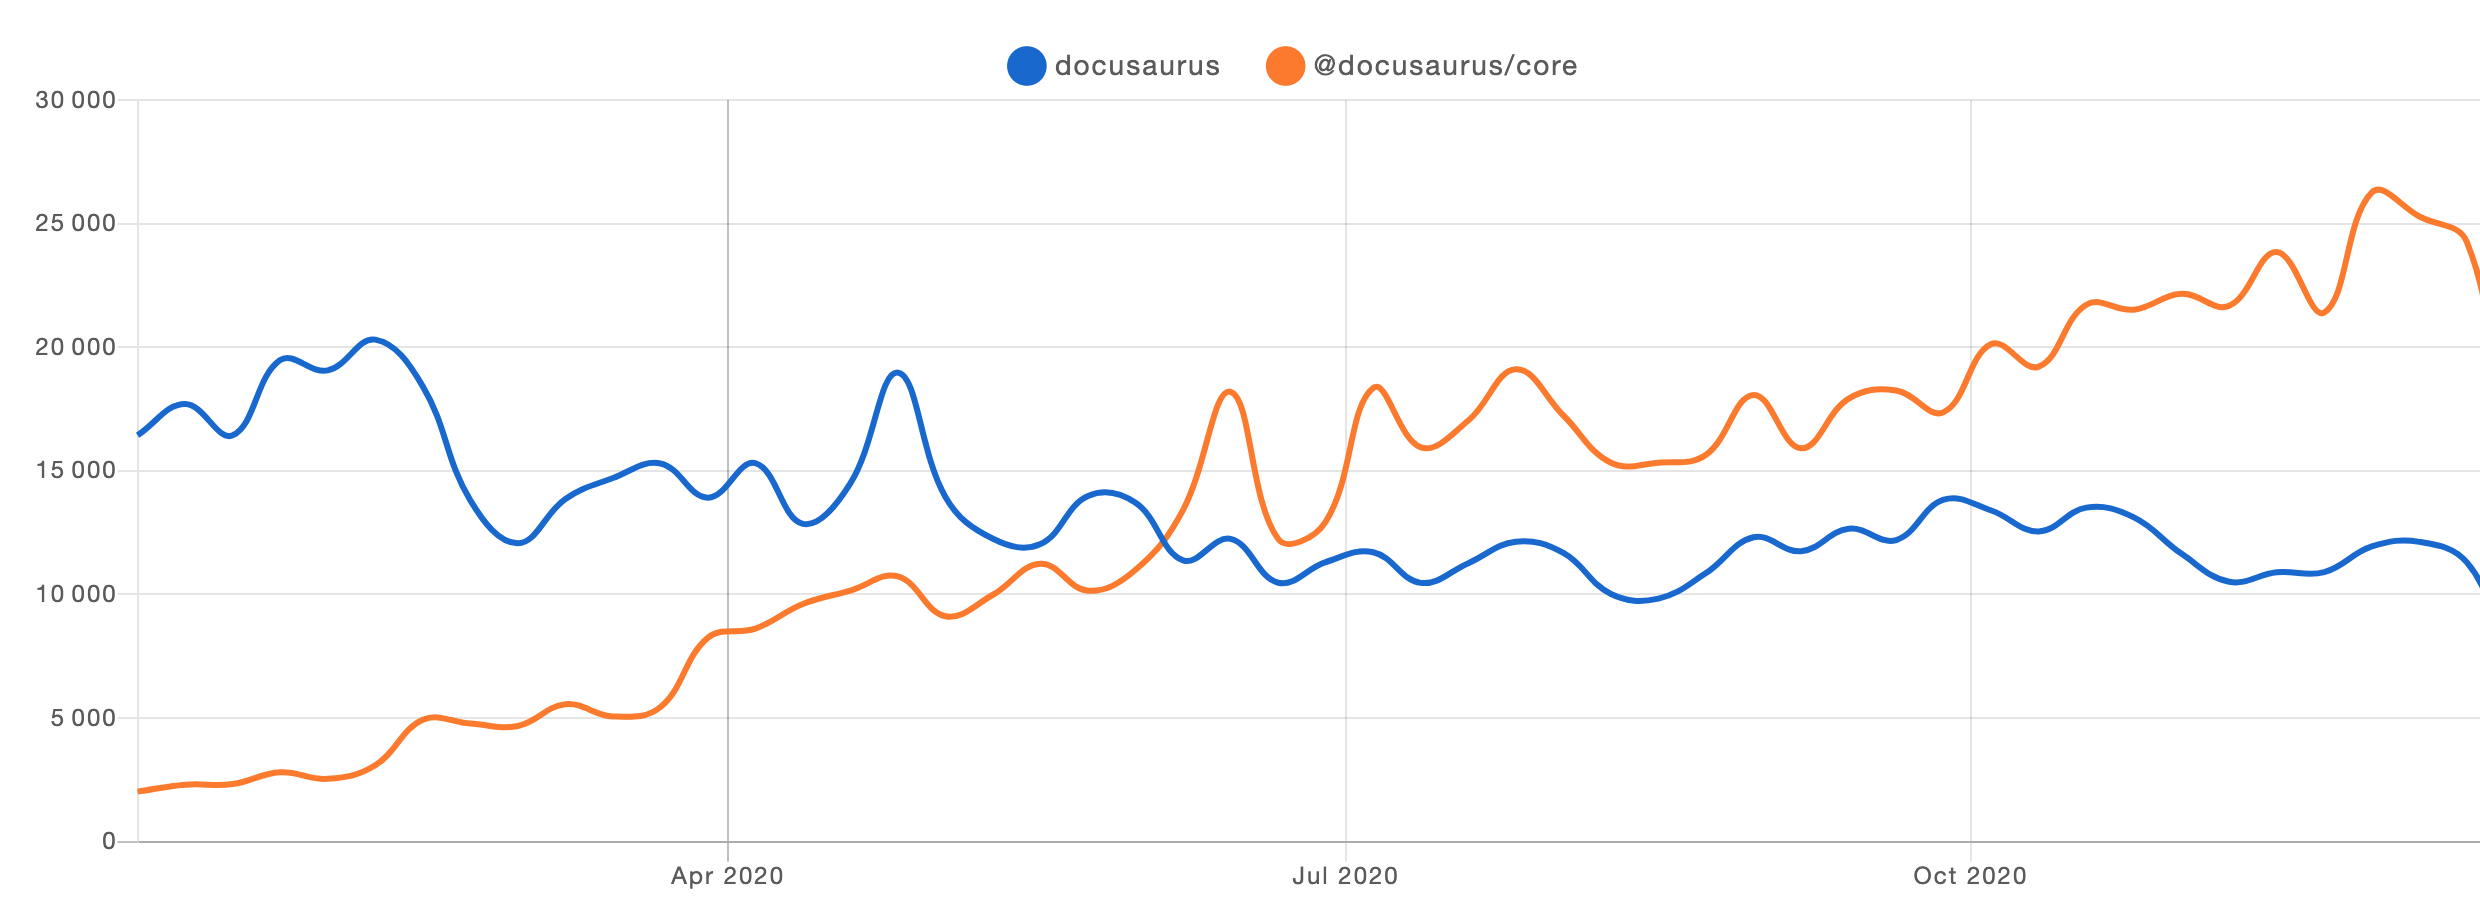 Docusaurus v1 vs. v2 npm trends of the year 2020. The installations of Docusaurus v2 is visibly up-growing, while v1 is slightly downward. V1 starts at 15000 and ends at 10000, while v2 starts at 2000 and ends at 25000. The intersection happens around June 2020.